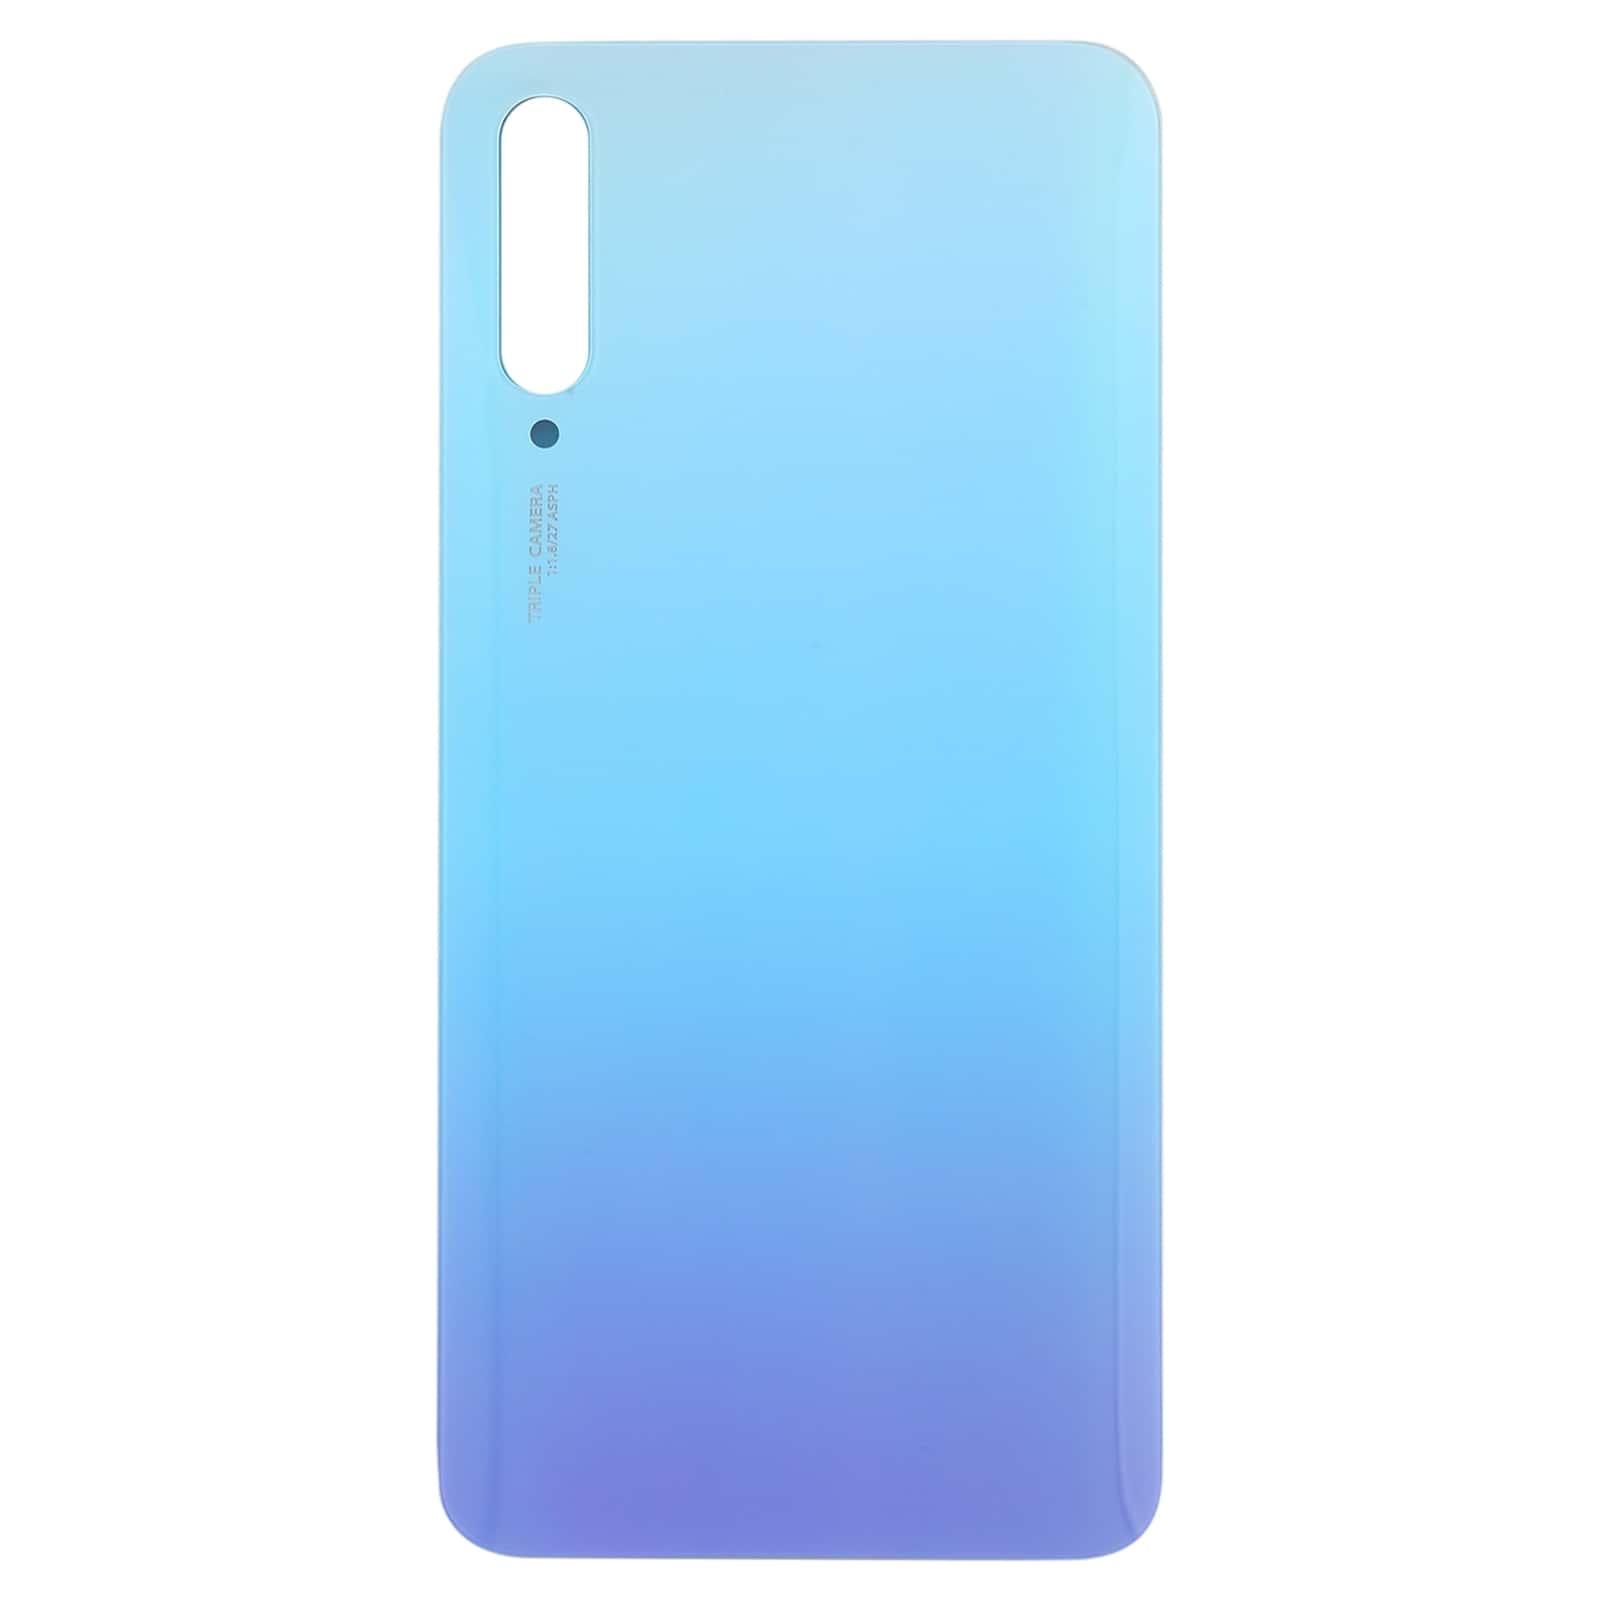 Back Panel Housing Body for Huawei Y9S White Purple